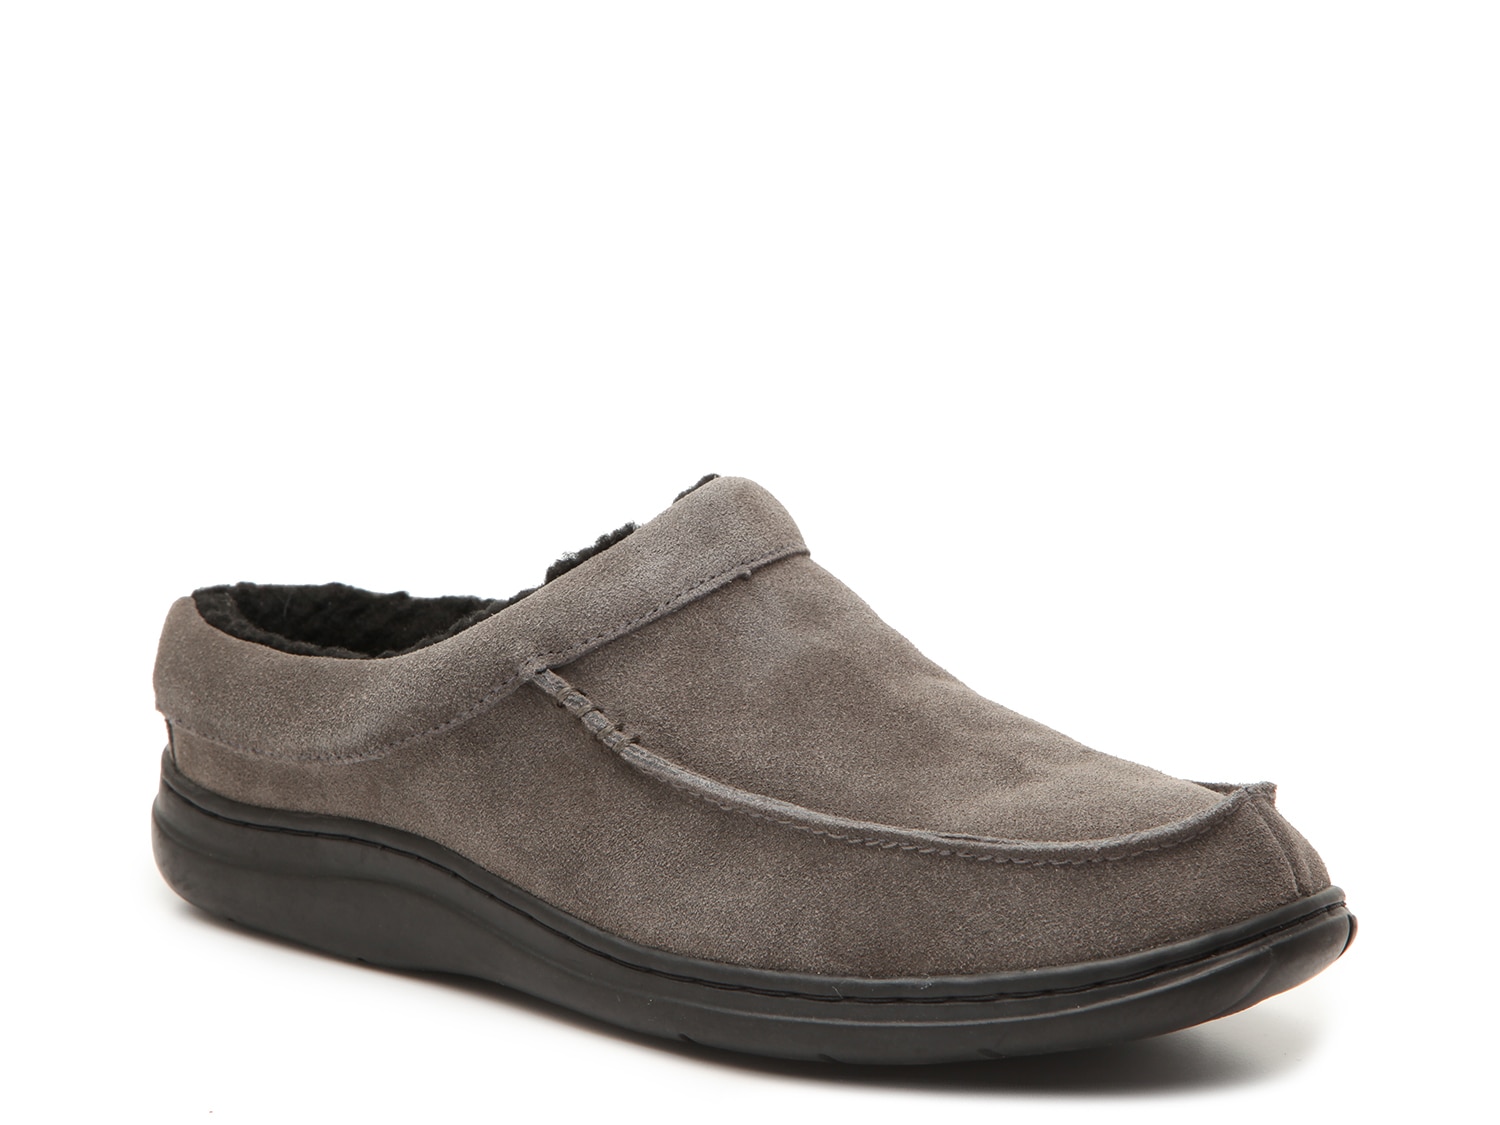 mens house shoes wide width